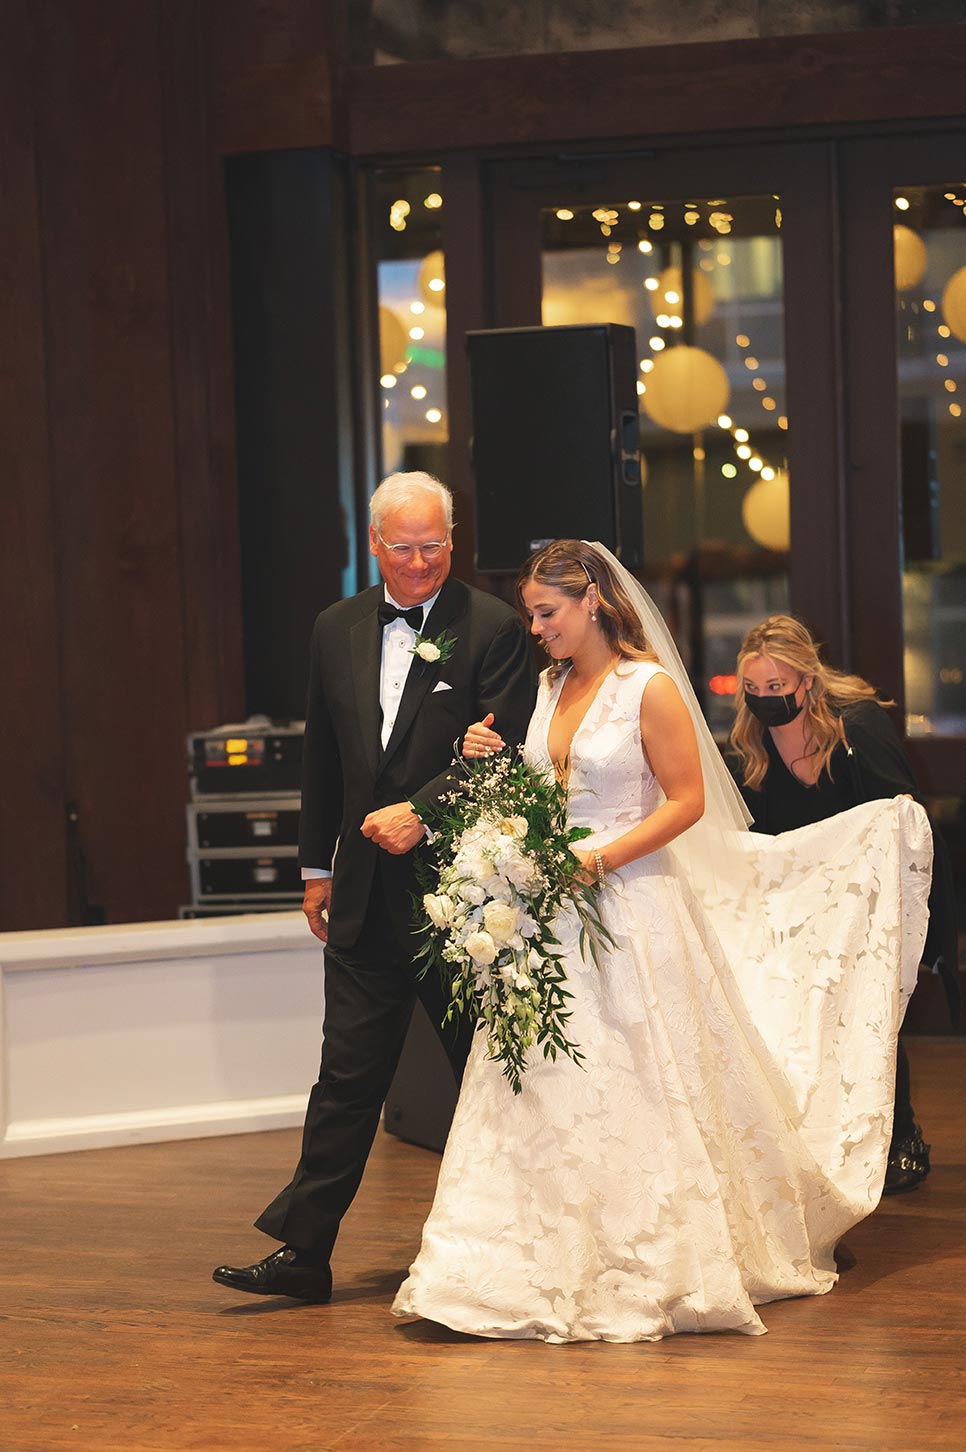 Father and daughter entrance, father in back tux, Mary the bride holding floral bouquet